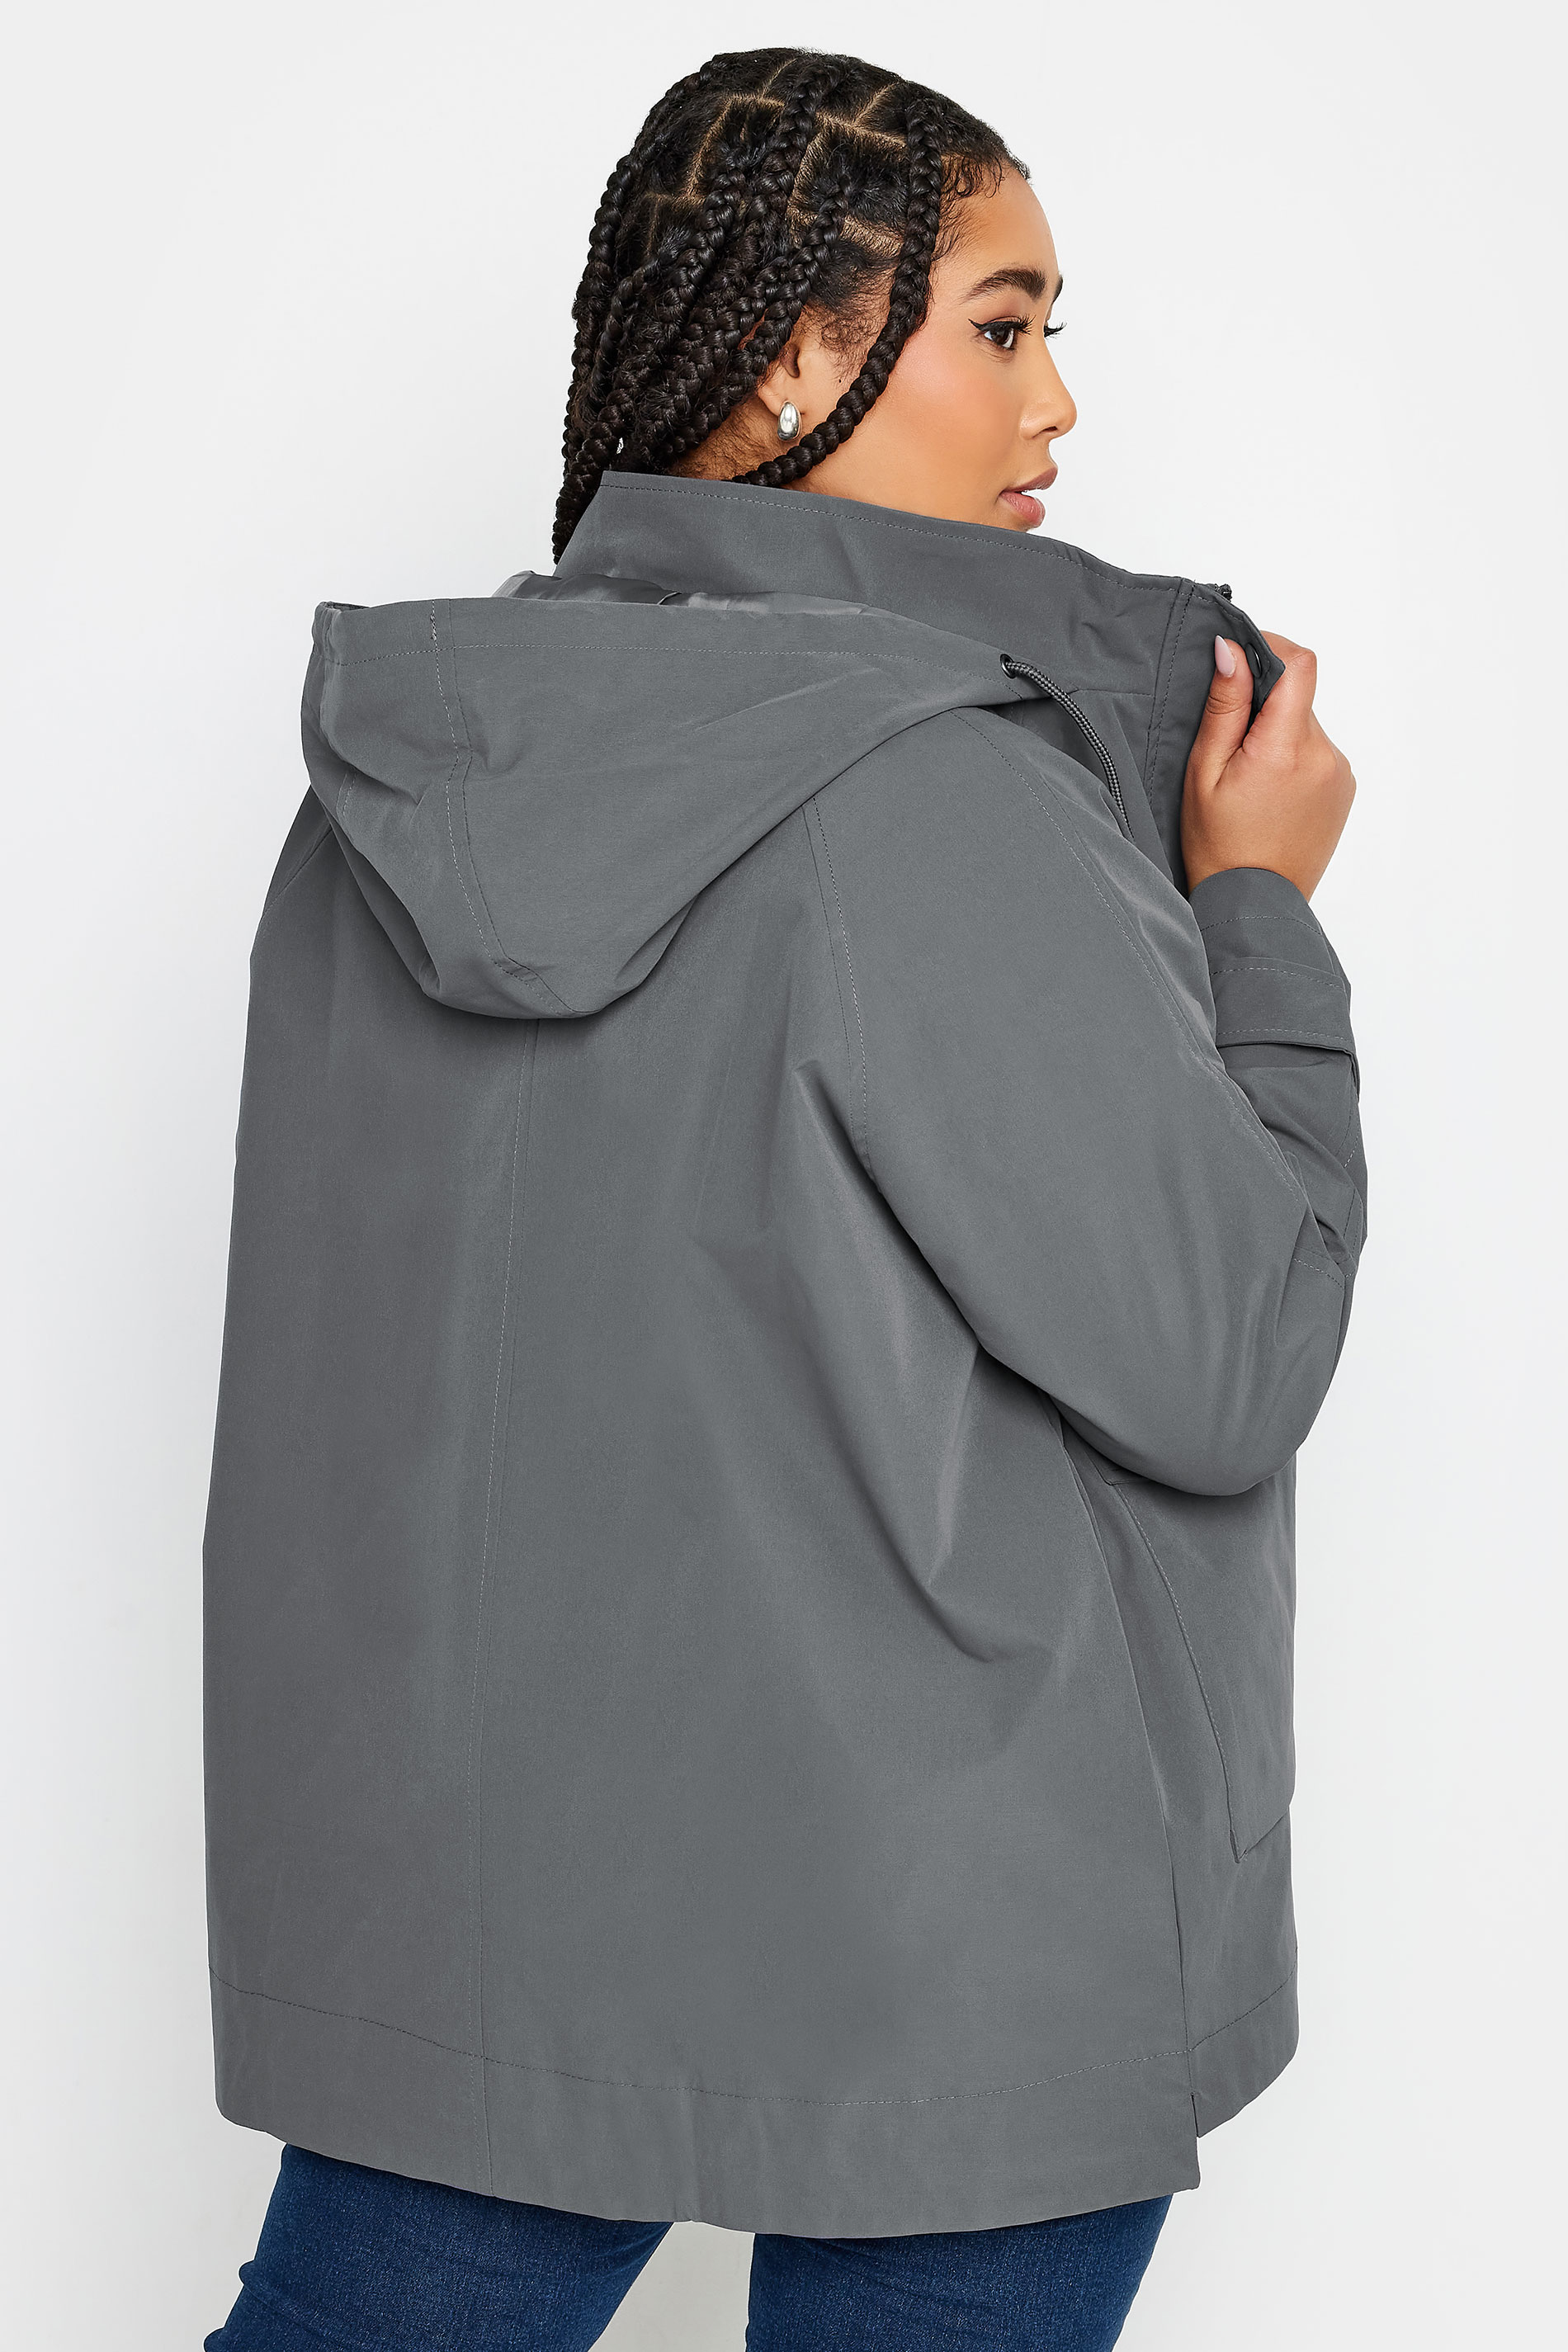 YOURS Plus Size Charcoal Grey Raglan Lightweight Jacket | Yours Clothing 3